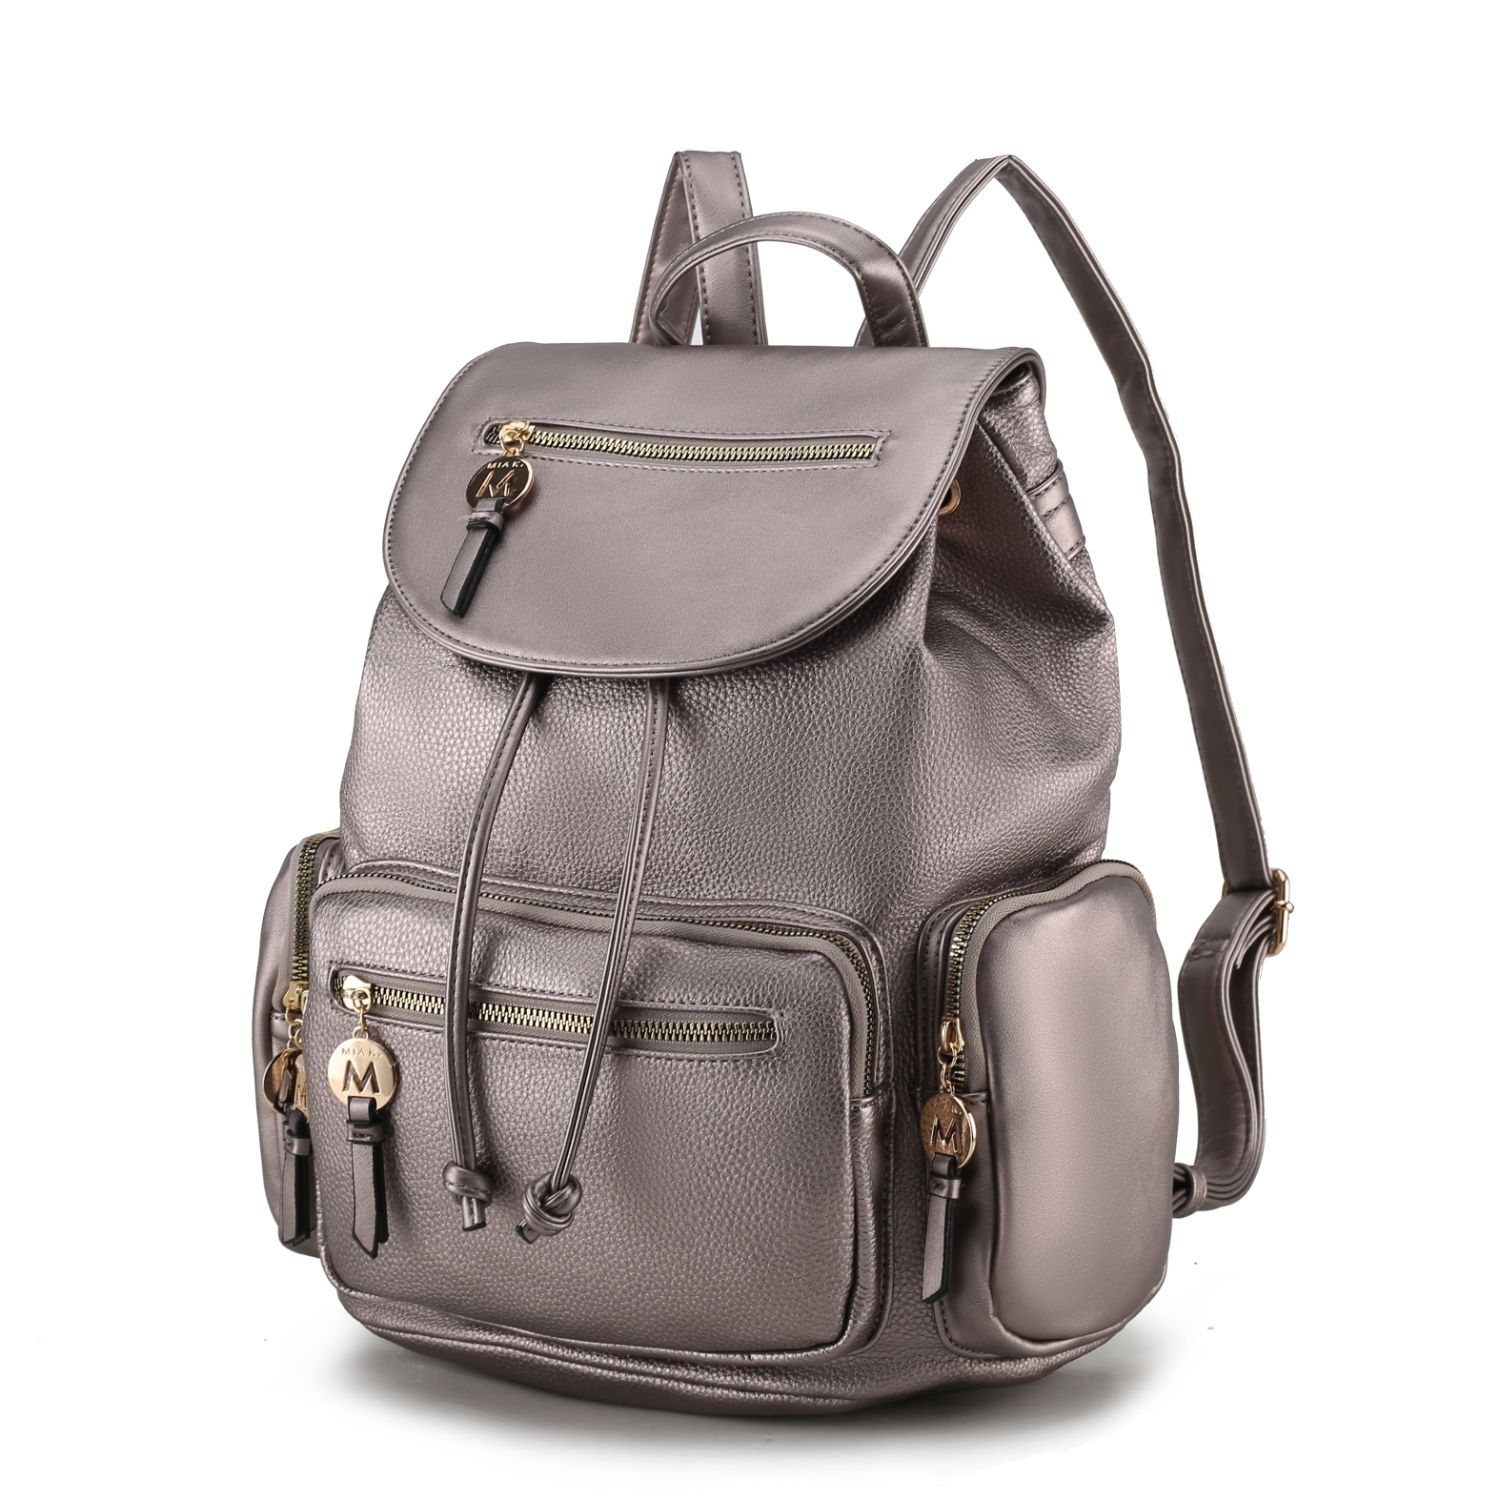 MKF Collection Ivanna Vegan Leather Women's Oversize Backpack By Mia K - Pewter